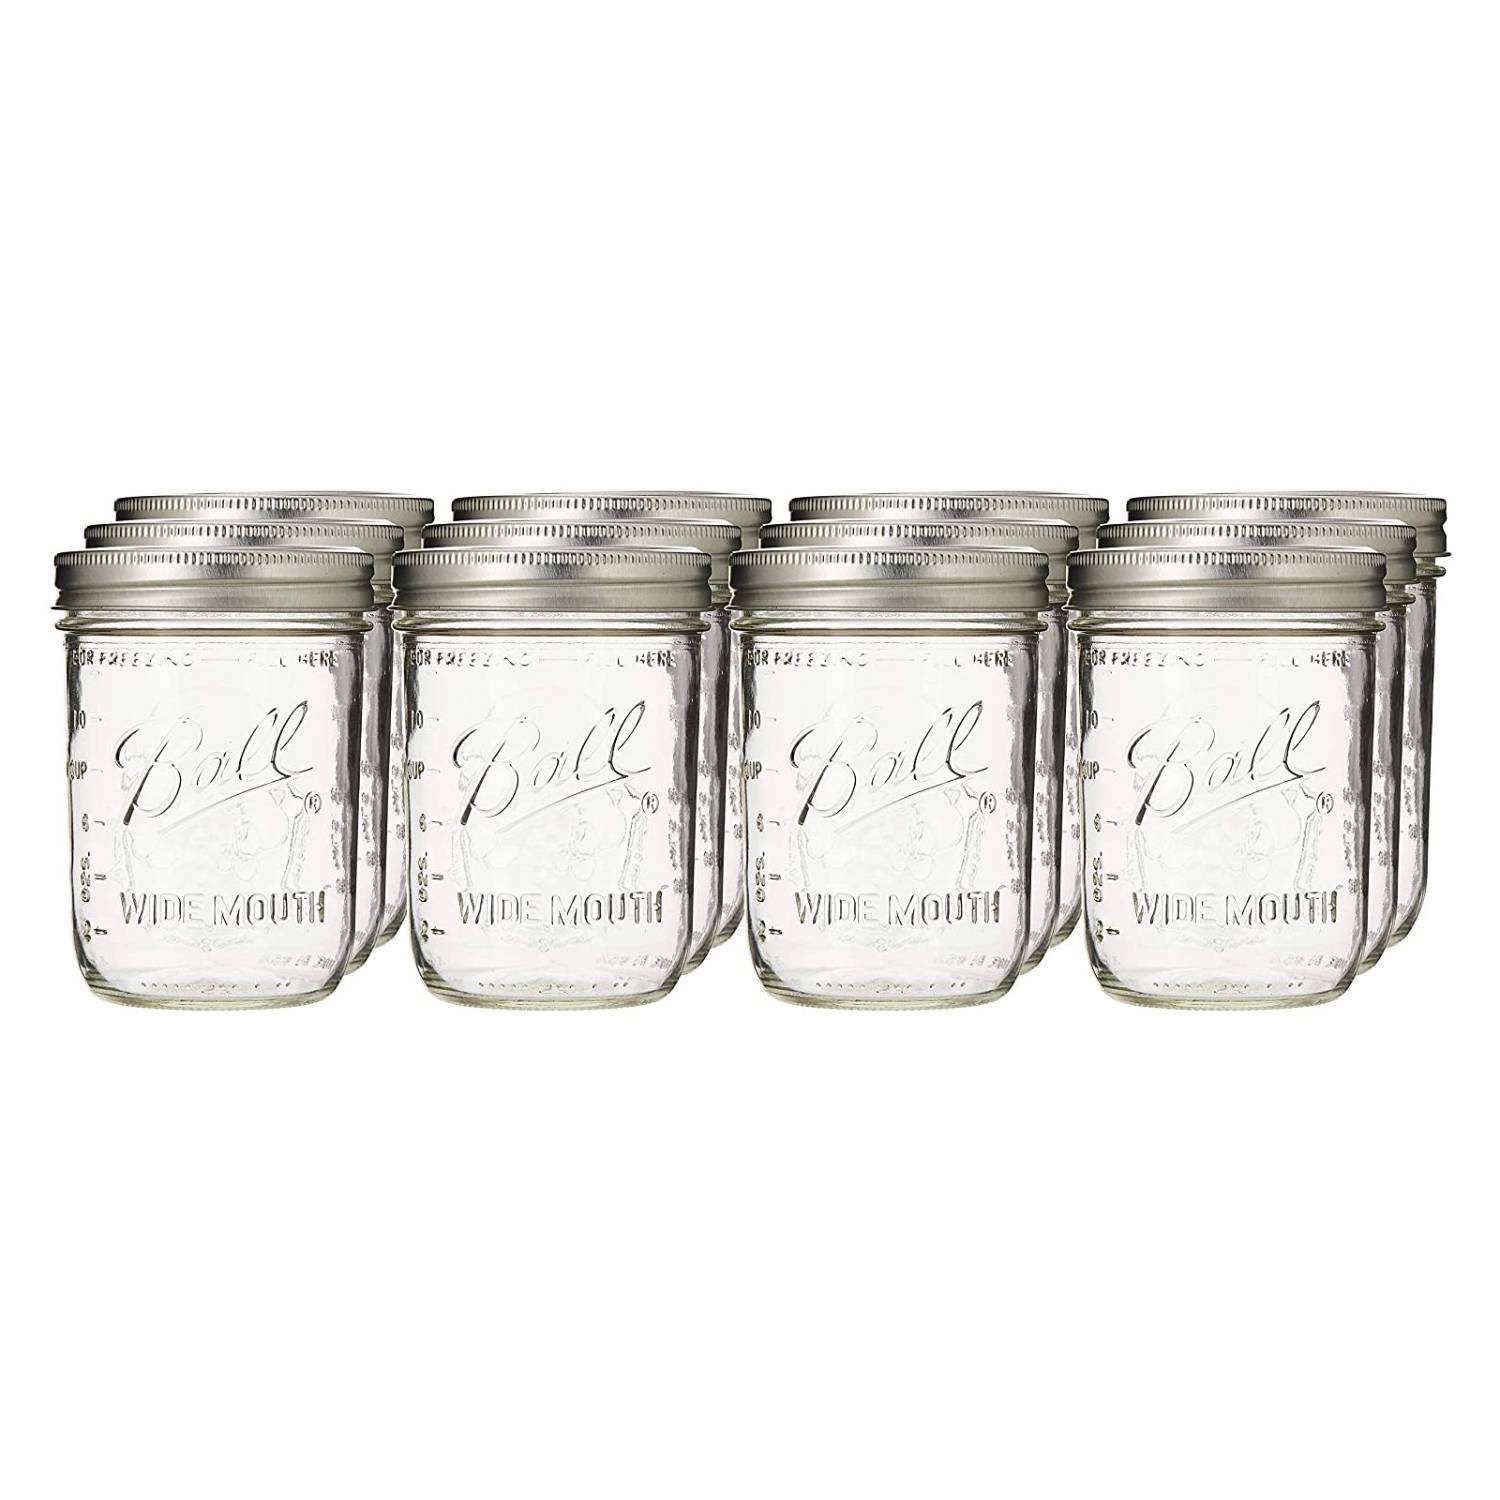 Ball Wide-Mouth Half-Gallon Canning Jars (6), Canning Jars and Accessories  - Lehman's